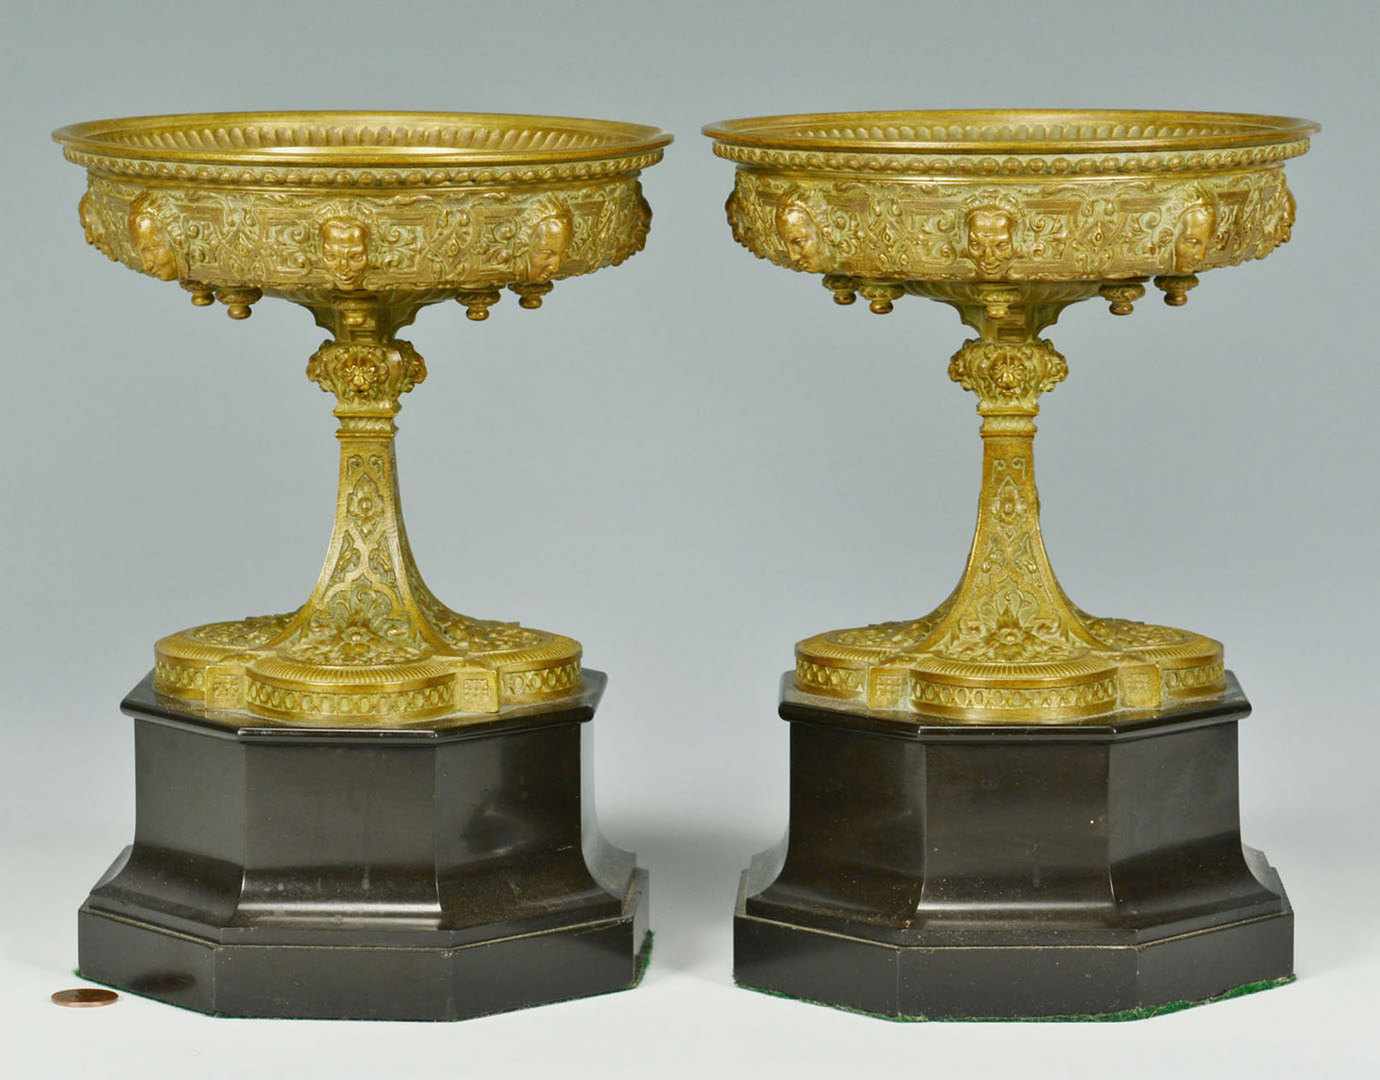 Lot 28: Pr. Classical Bronze Urns Mounted on Black Bases